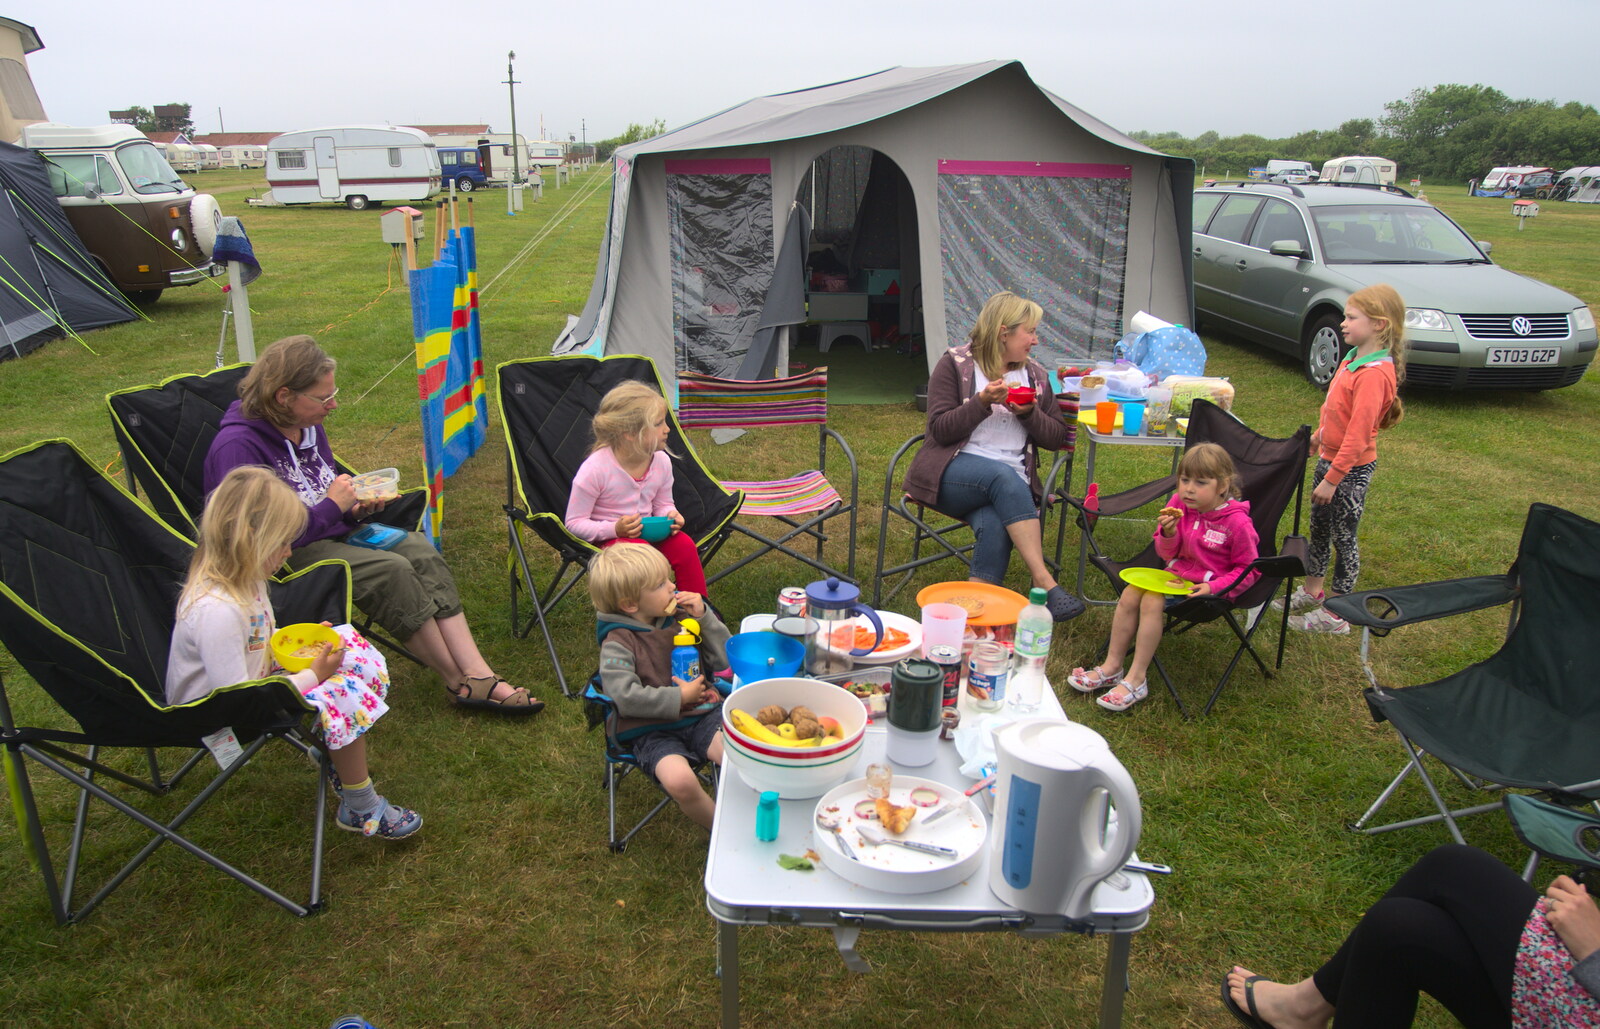 Breakfast before the rain from A Wet Weekend of Camping, Waxham Sands, Norfolk - 13th June 2015